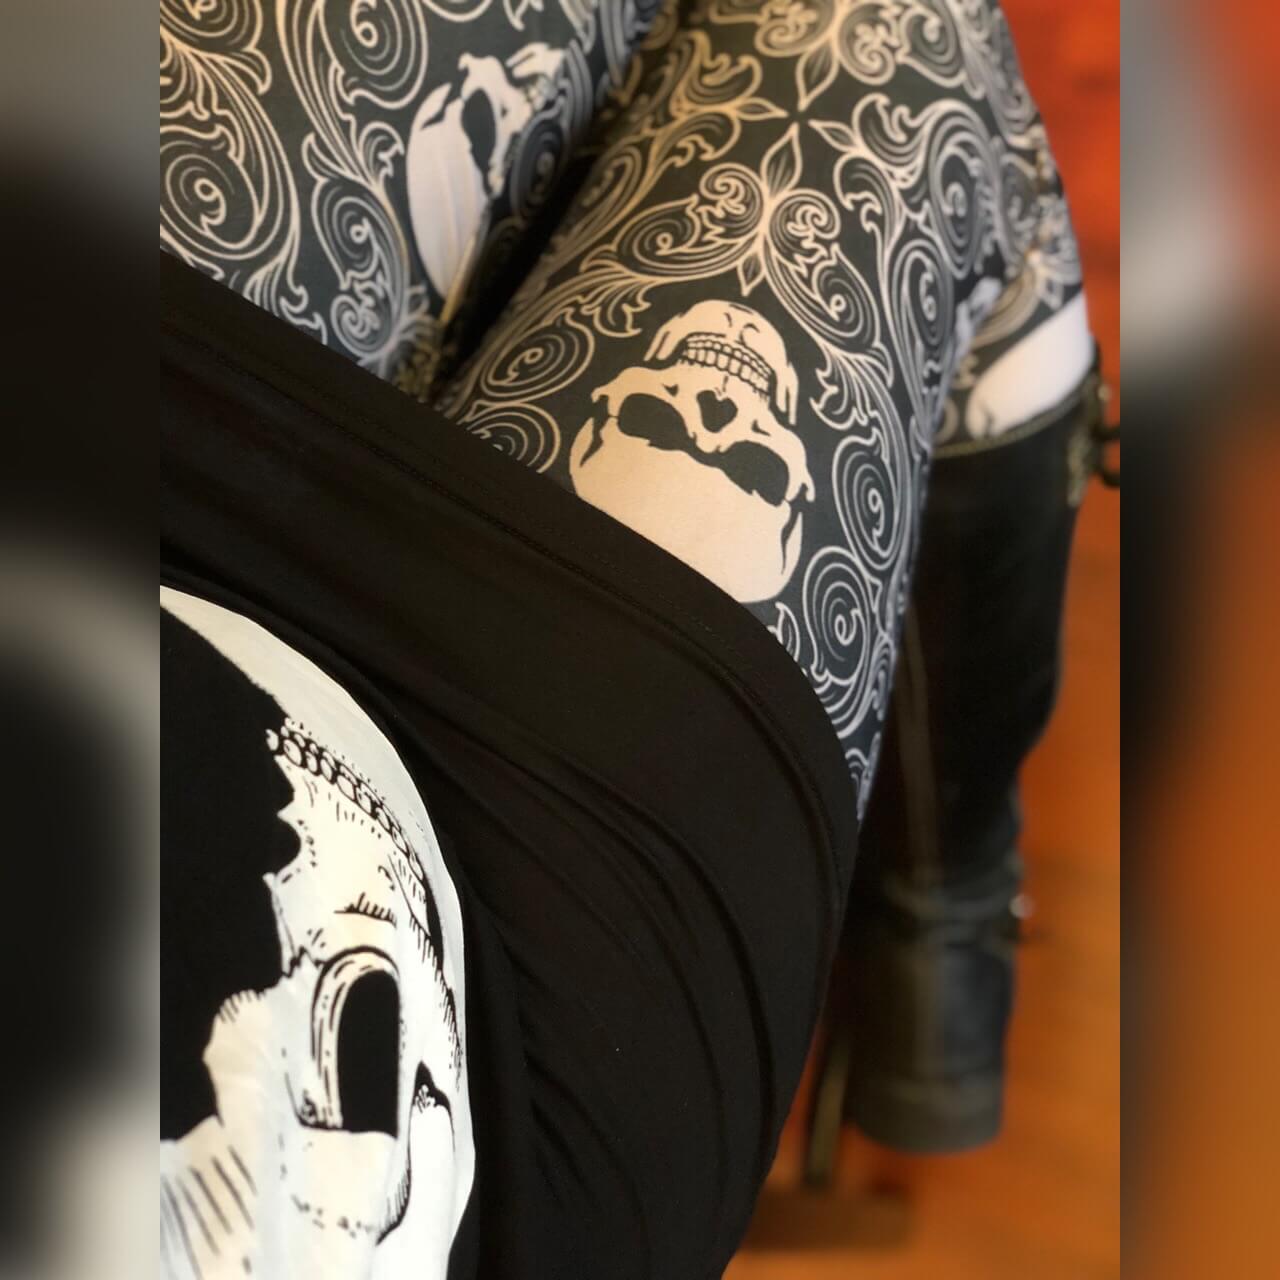 Skull print leggings close up with skull moon dress and boots